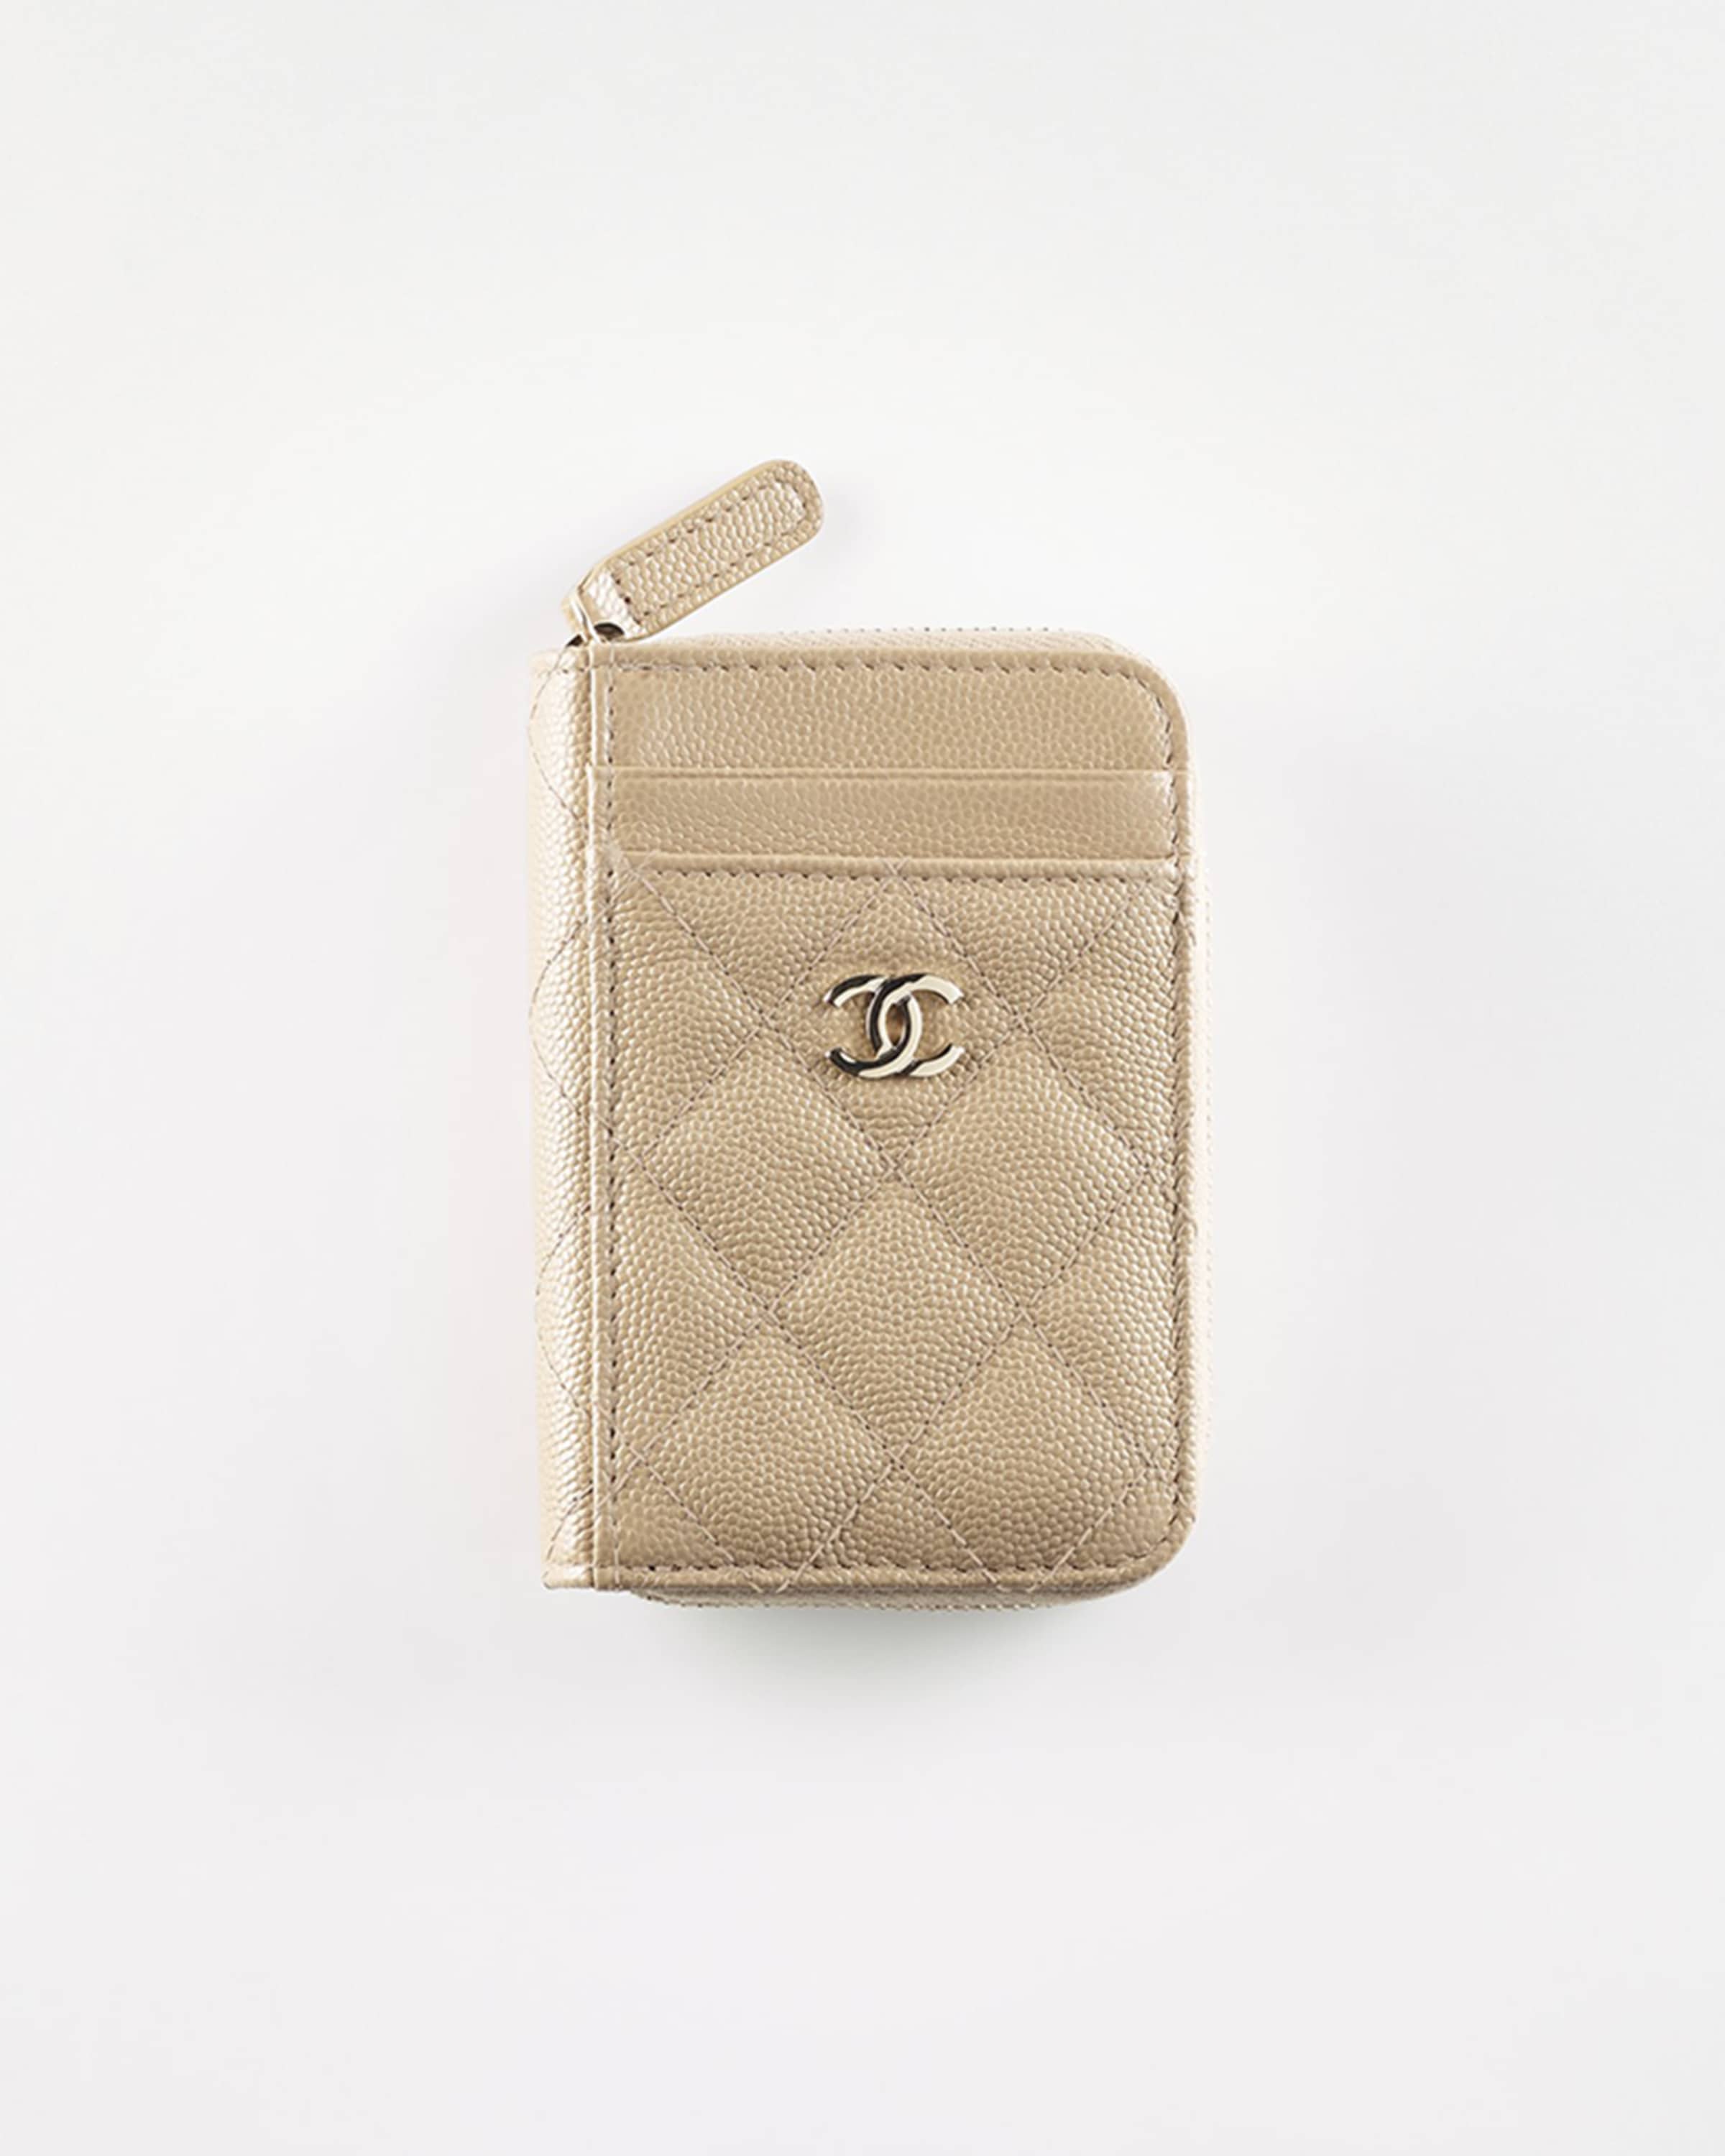 Chanel coin pouch 